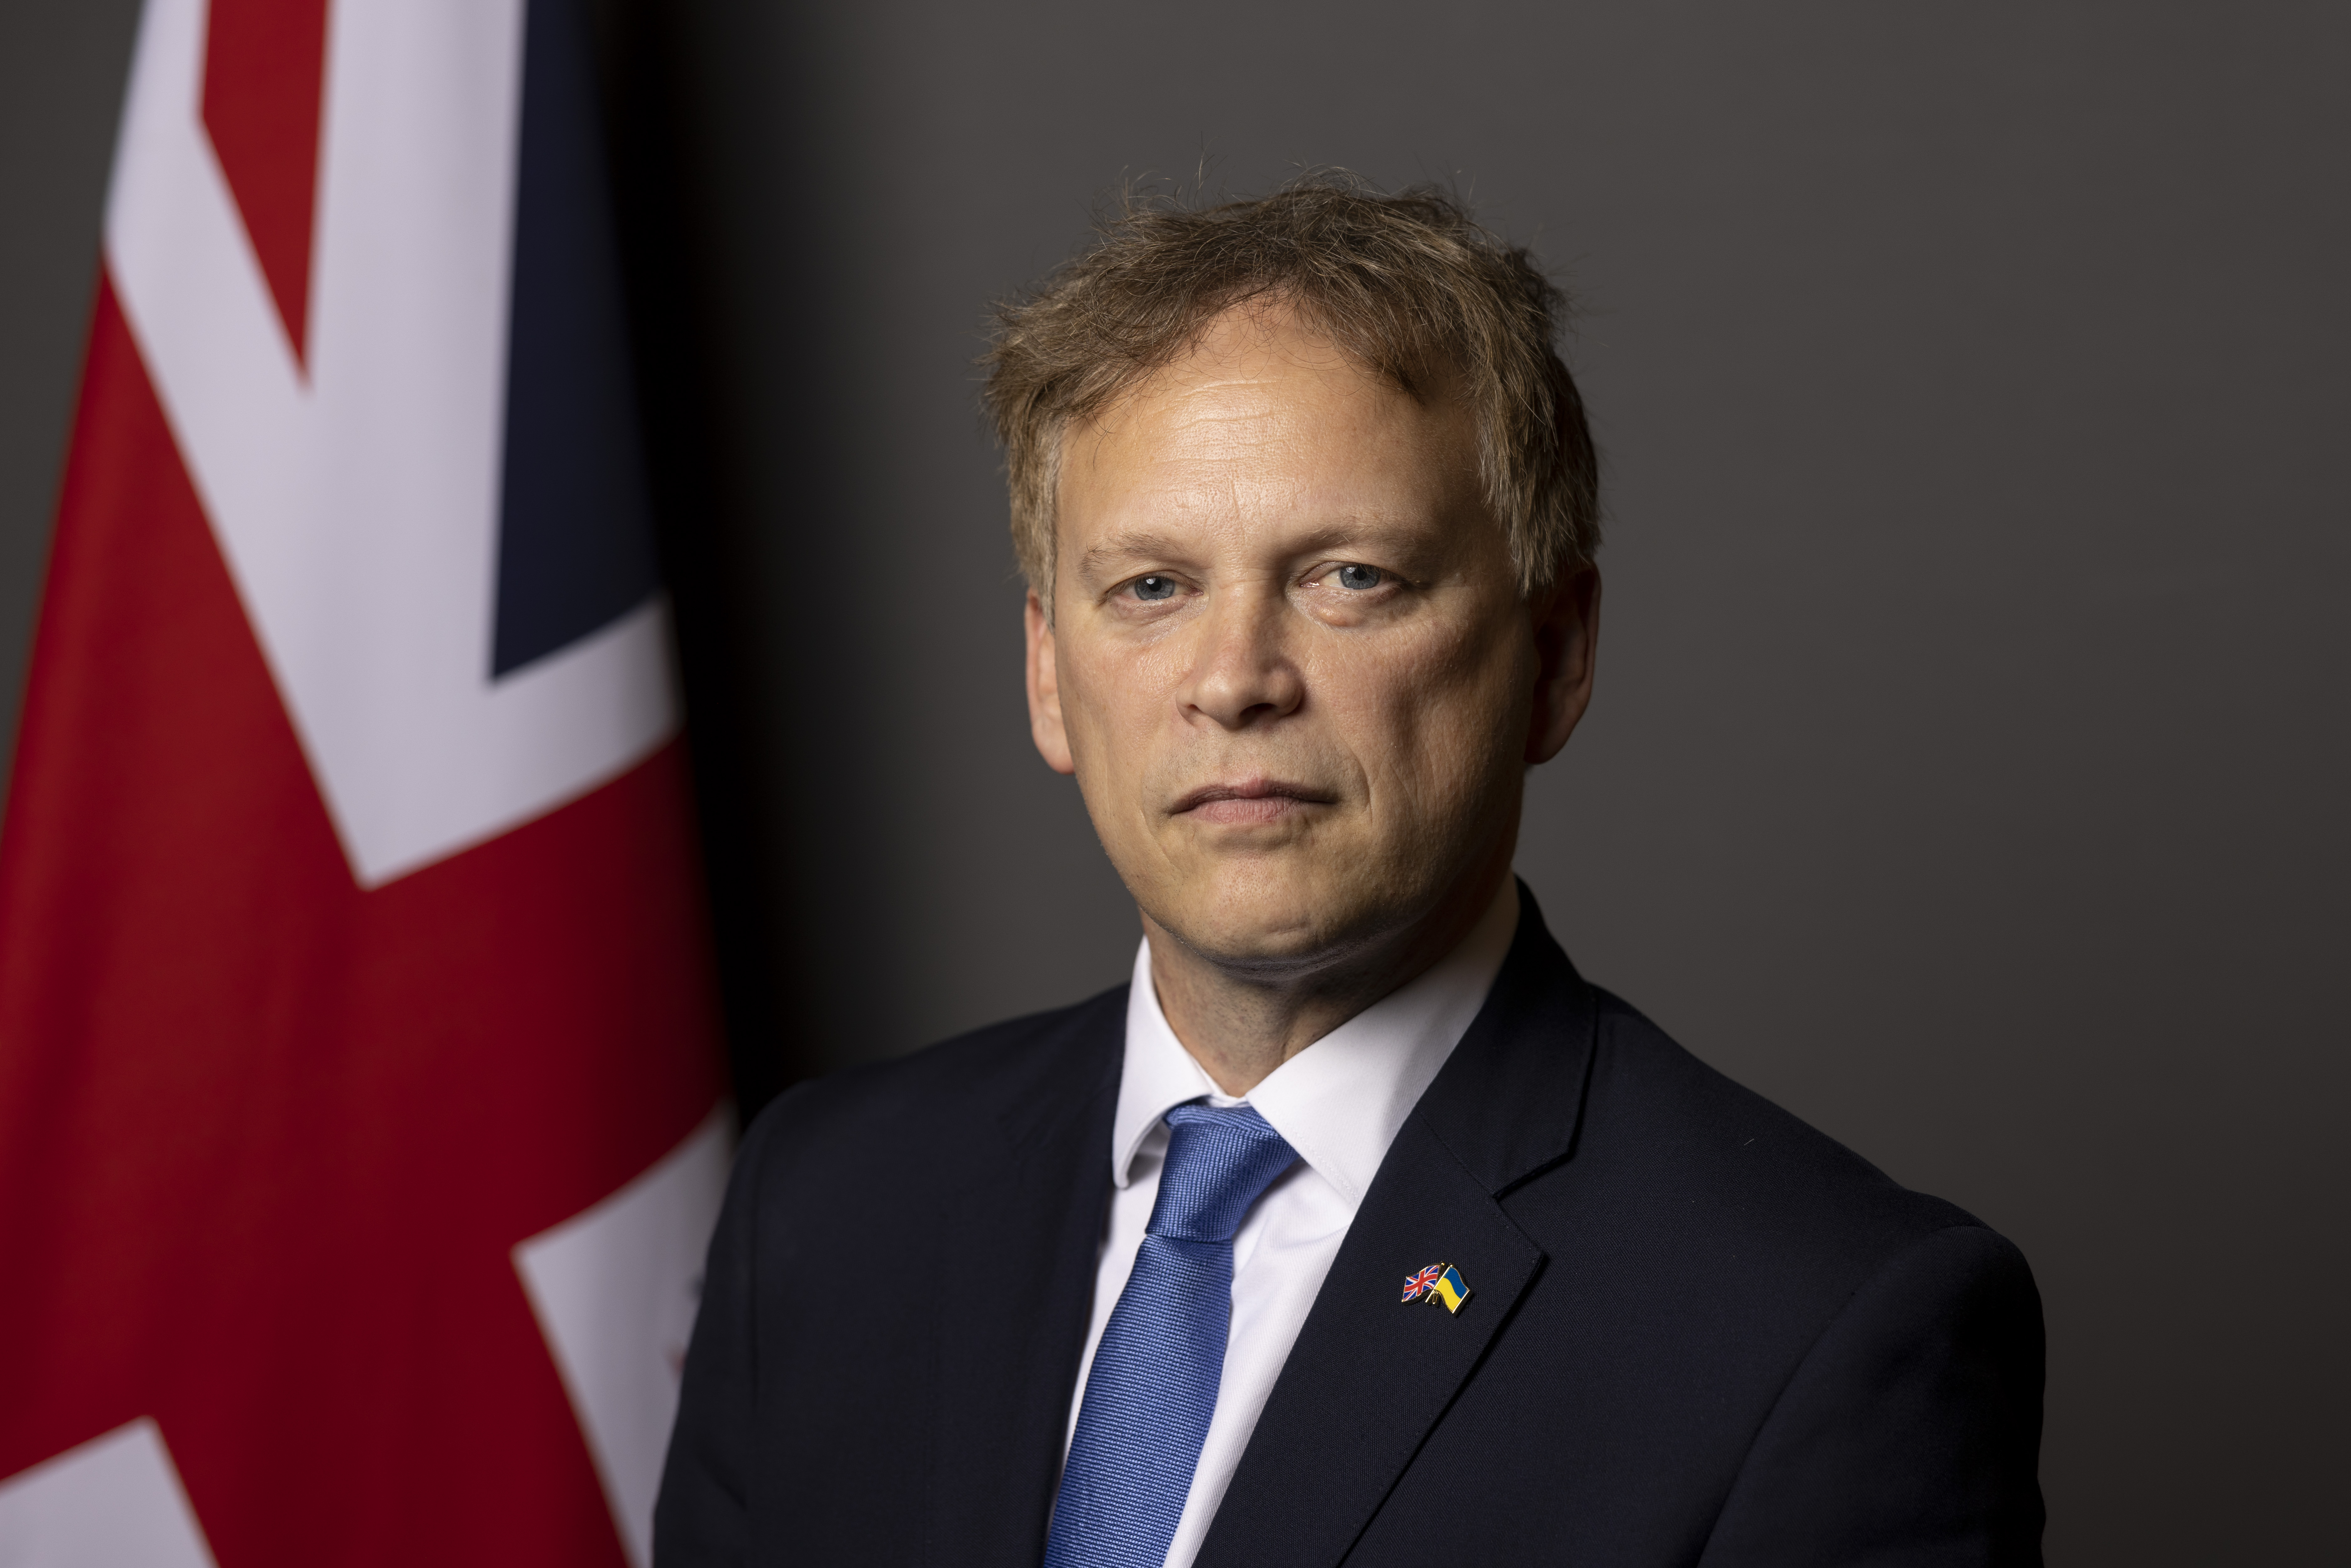 Grant Shapps: The allegations of Russian malign activity in the UK are deeply concerning